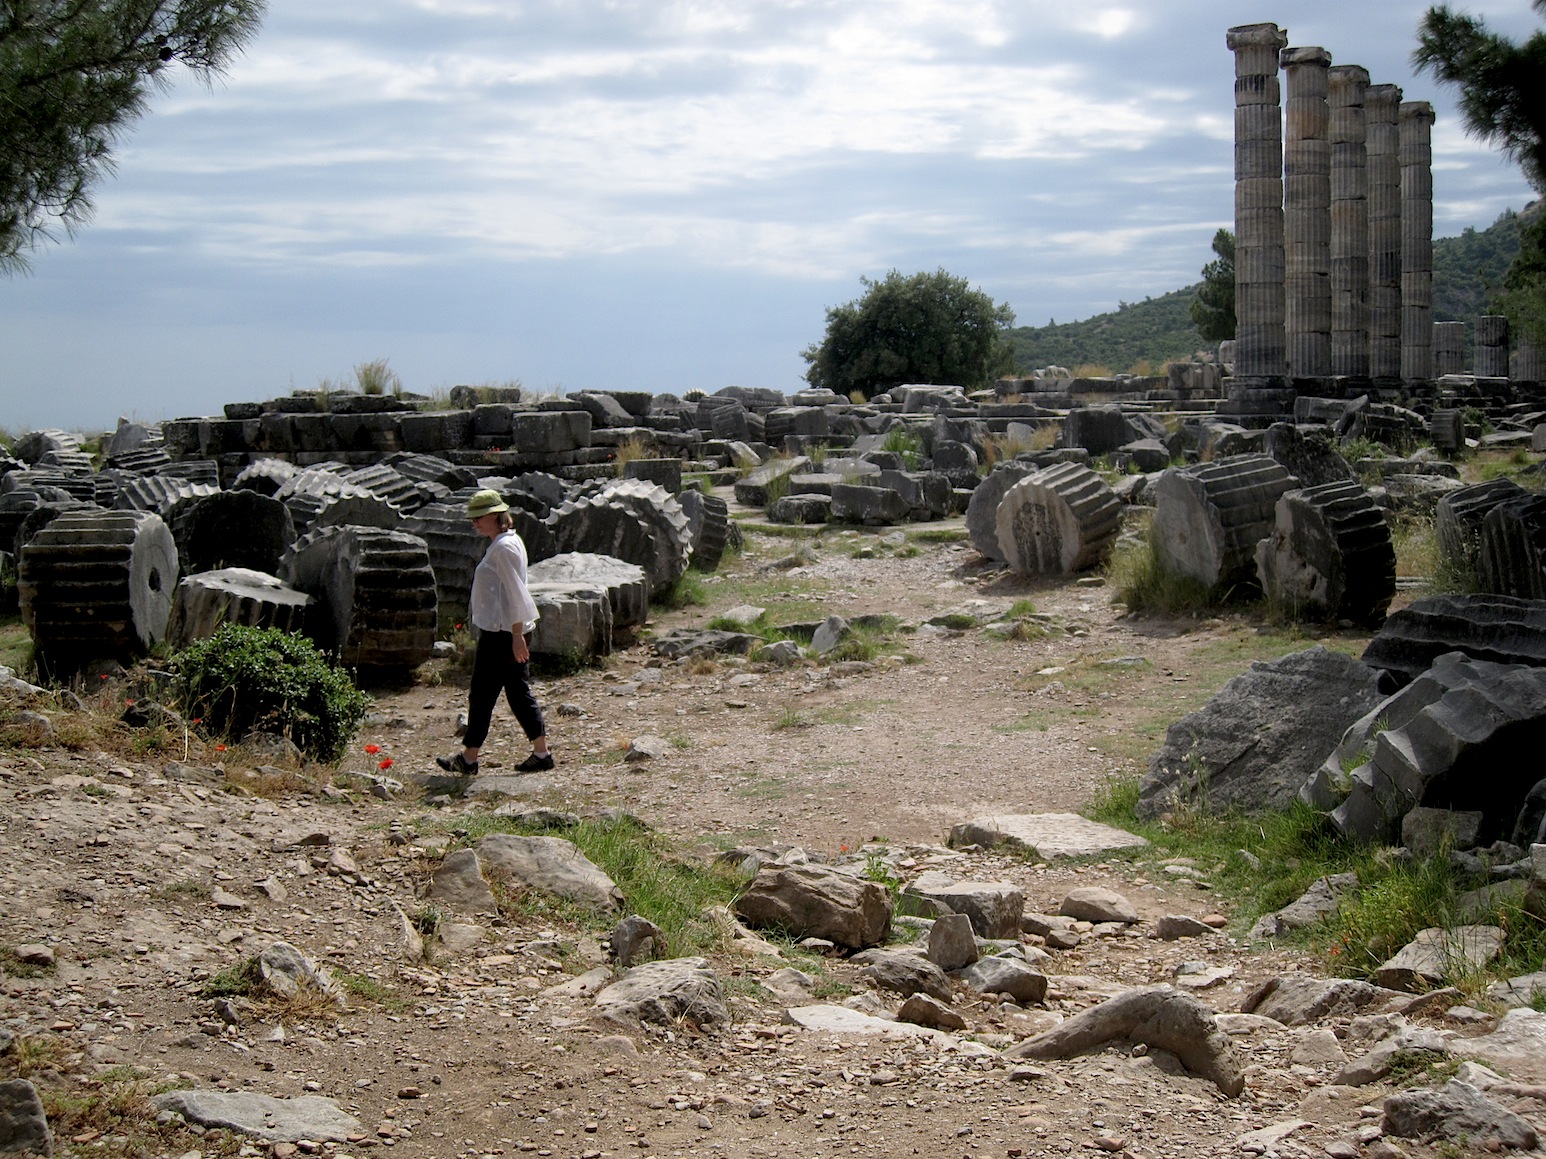 a man walking through a stone covered area with rocks and buildings